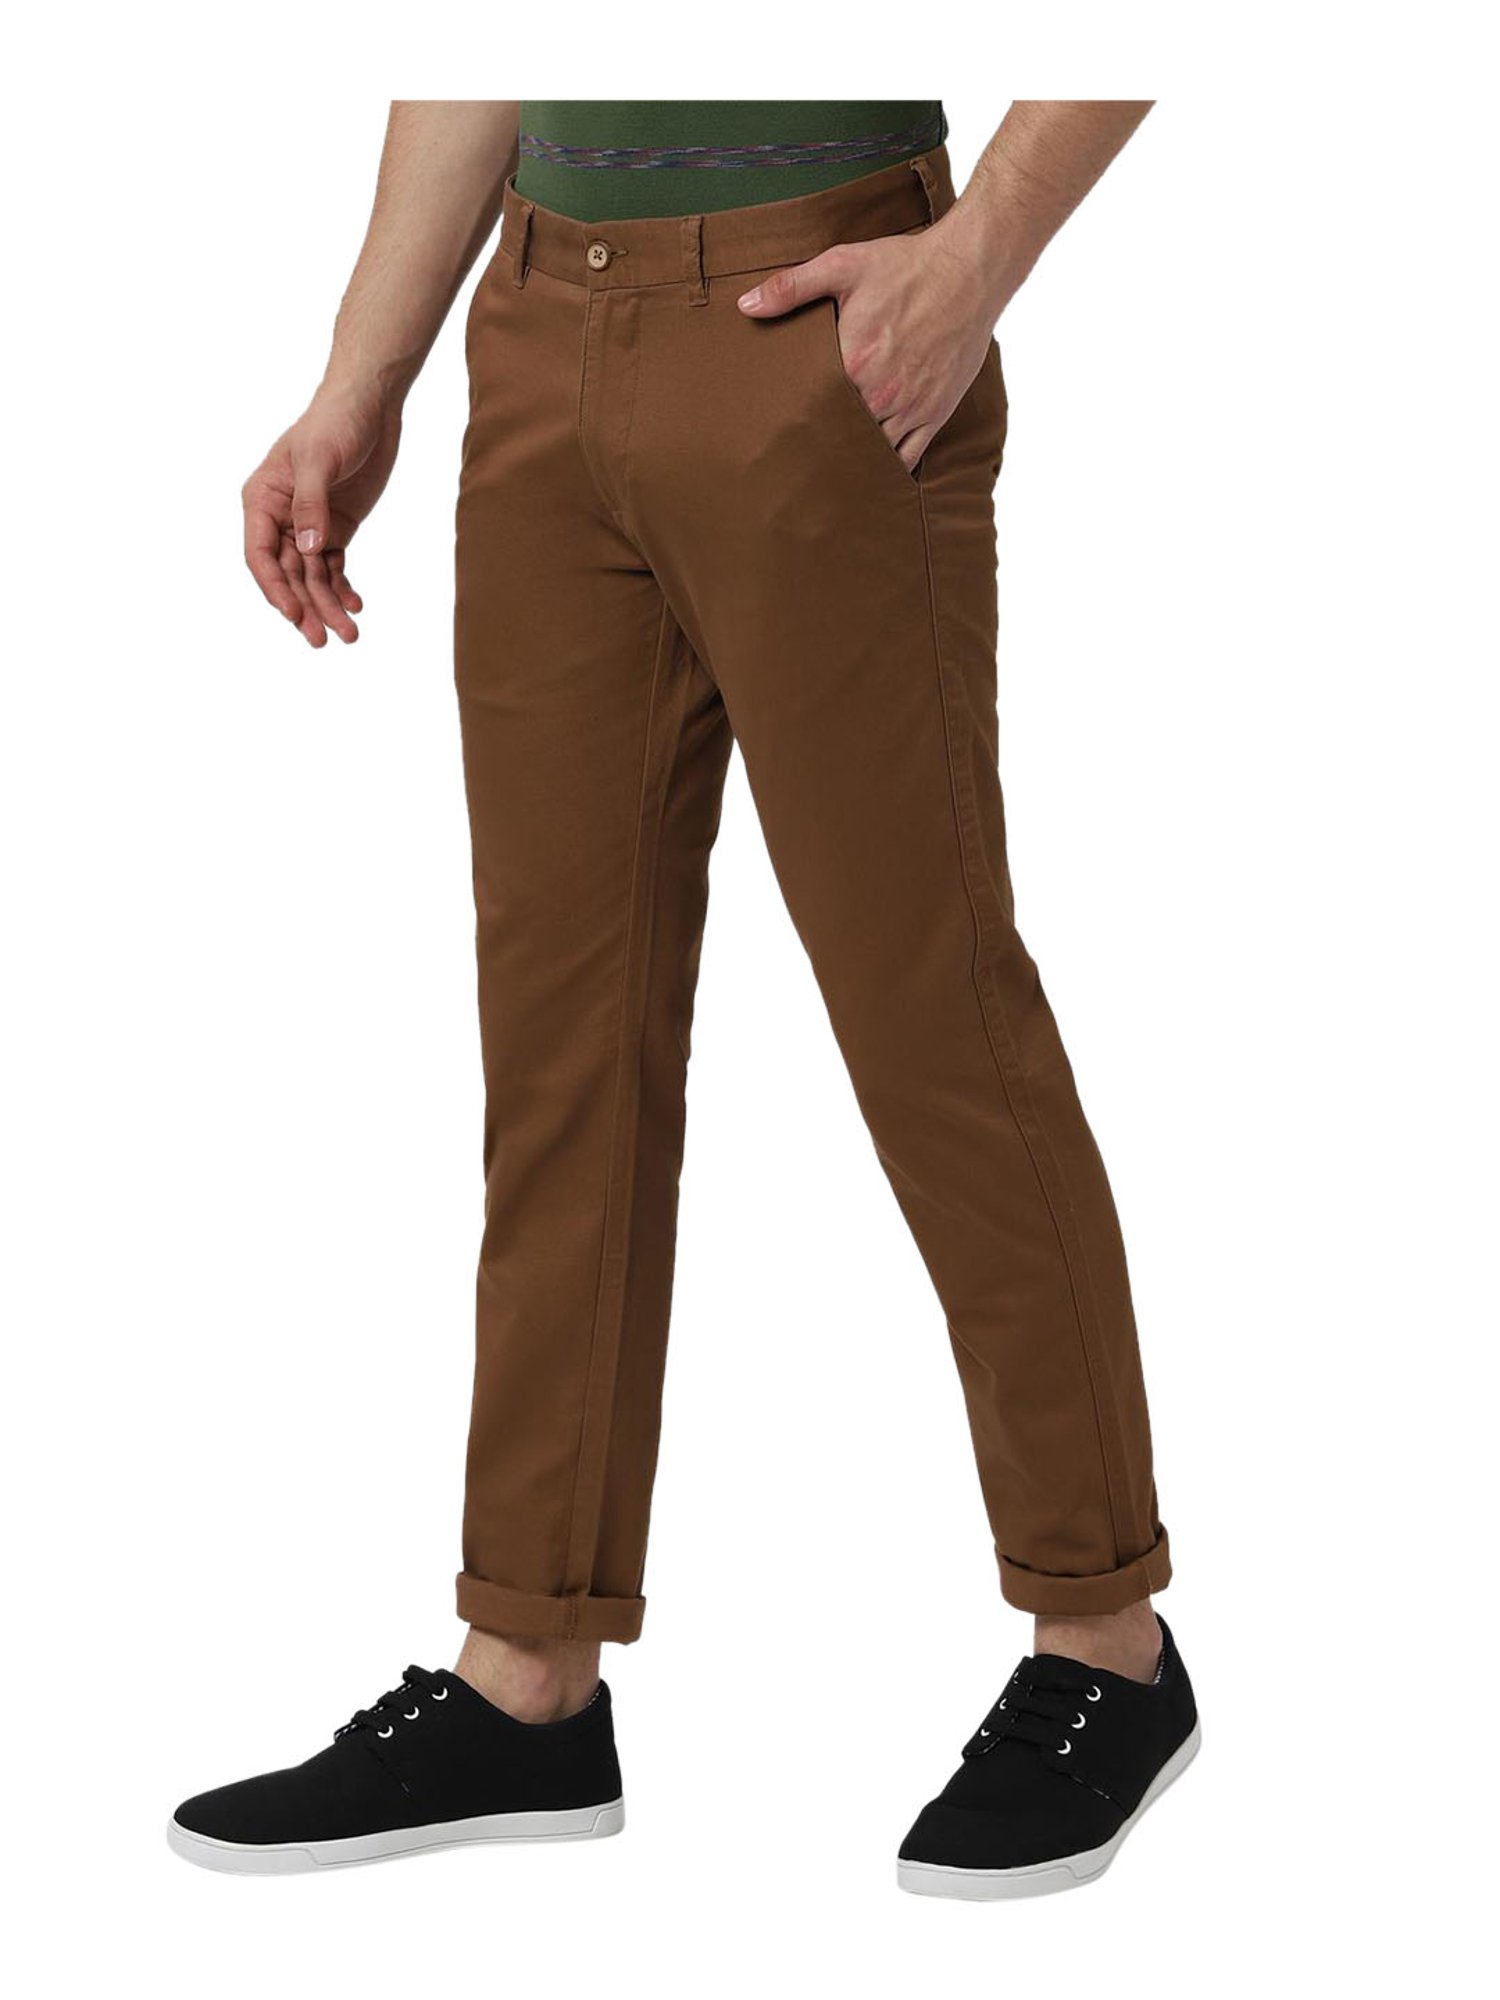 Peter England Mens Super Slim Casual Trousers  Shop online at low price  for Peter England Mens Super Slim Casual Trousers at Helmetdonin